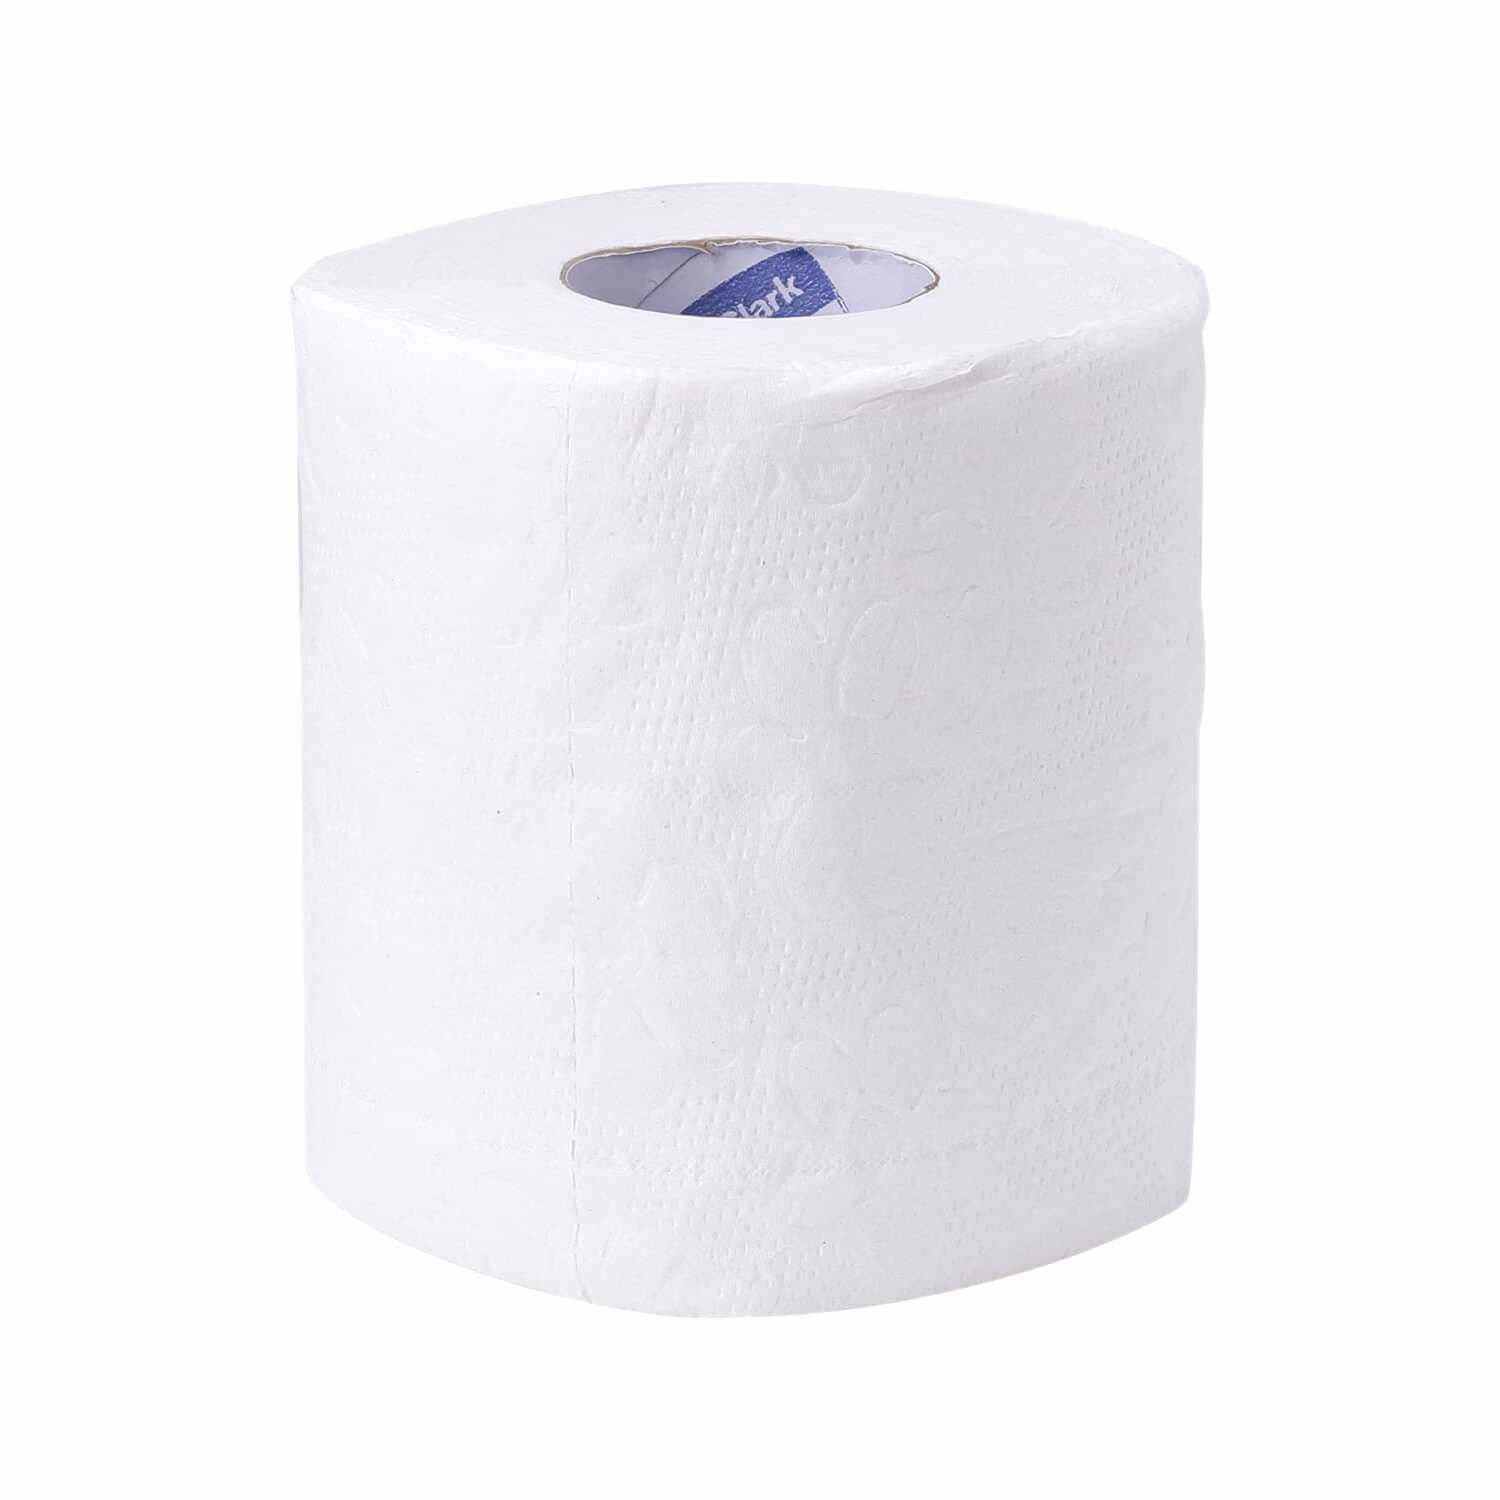 Kimberly Clark* Scott* Essential Bathroom Tissue Roll, 2Ply, 4001 (Pack of 80 Rolls/Case, 375 Sheets/Pack, Total 30,000 Sheets )